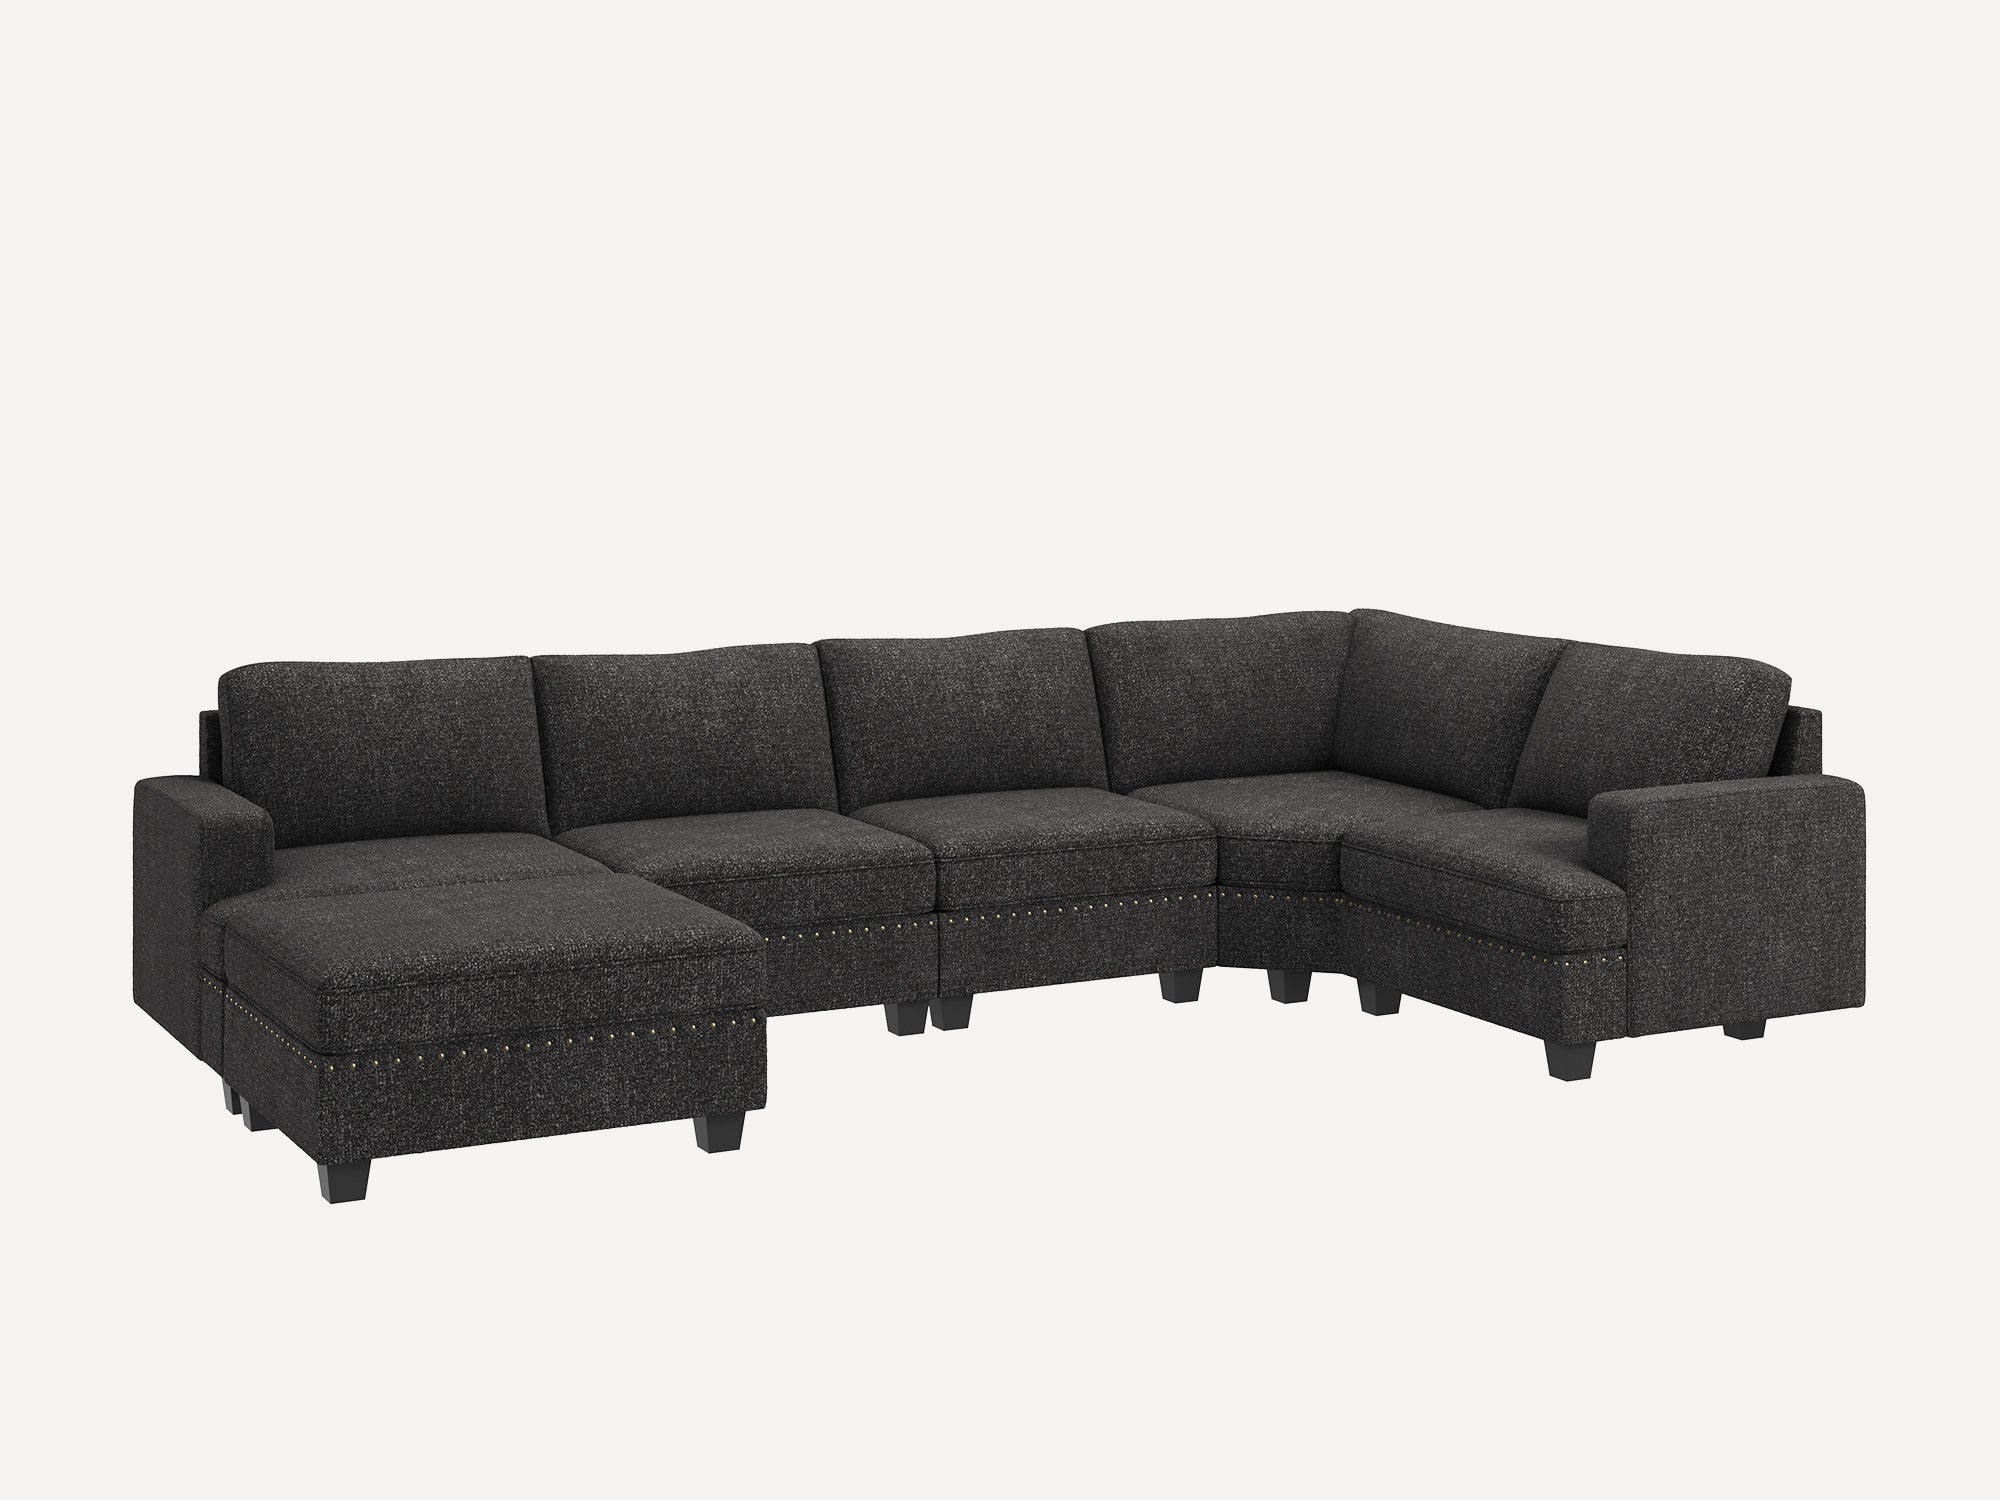 NOLANY U-Shaped Corner Modular Sofa Oversized Convertible Sectional Sofa Couch for Living Room #Color_Dark Grey